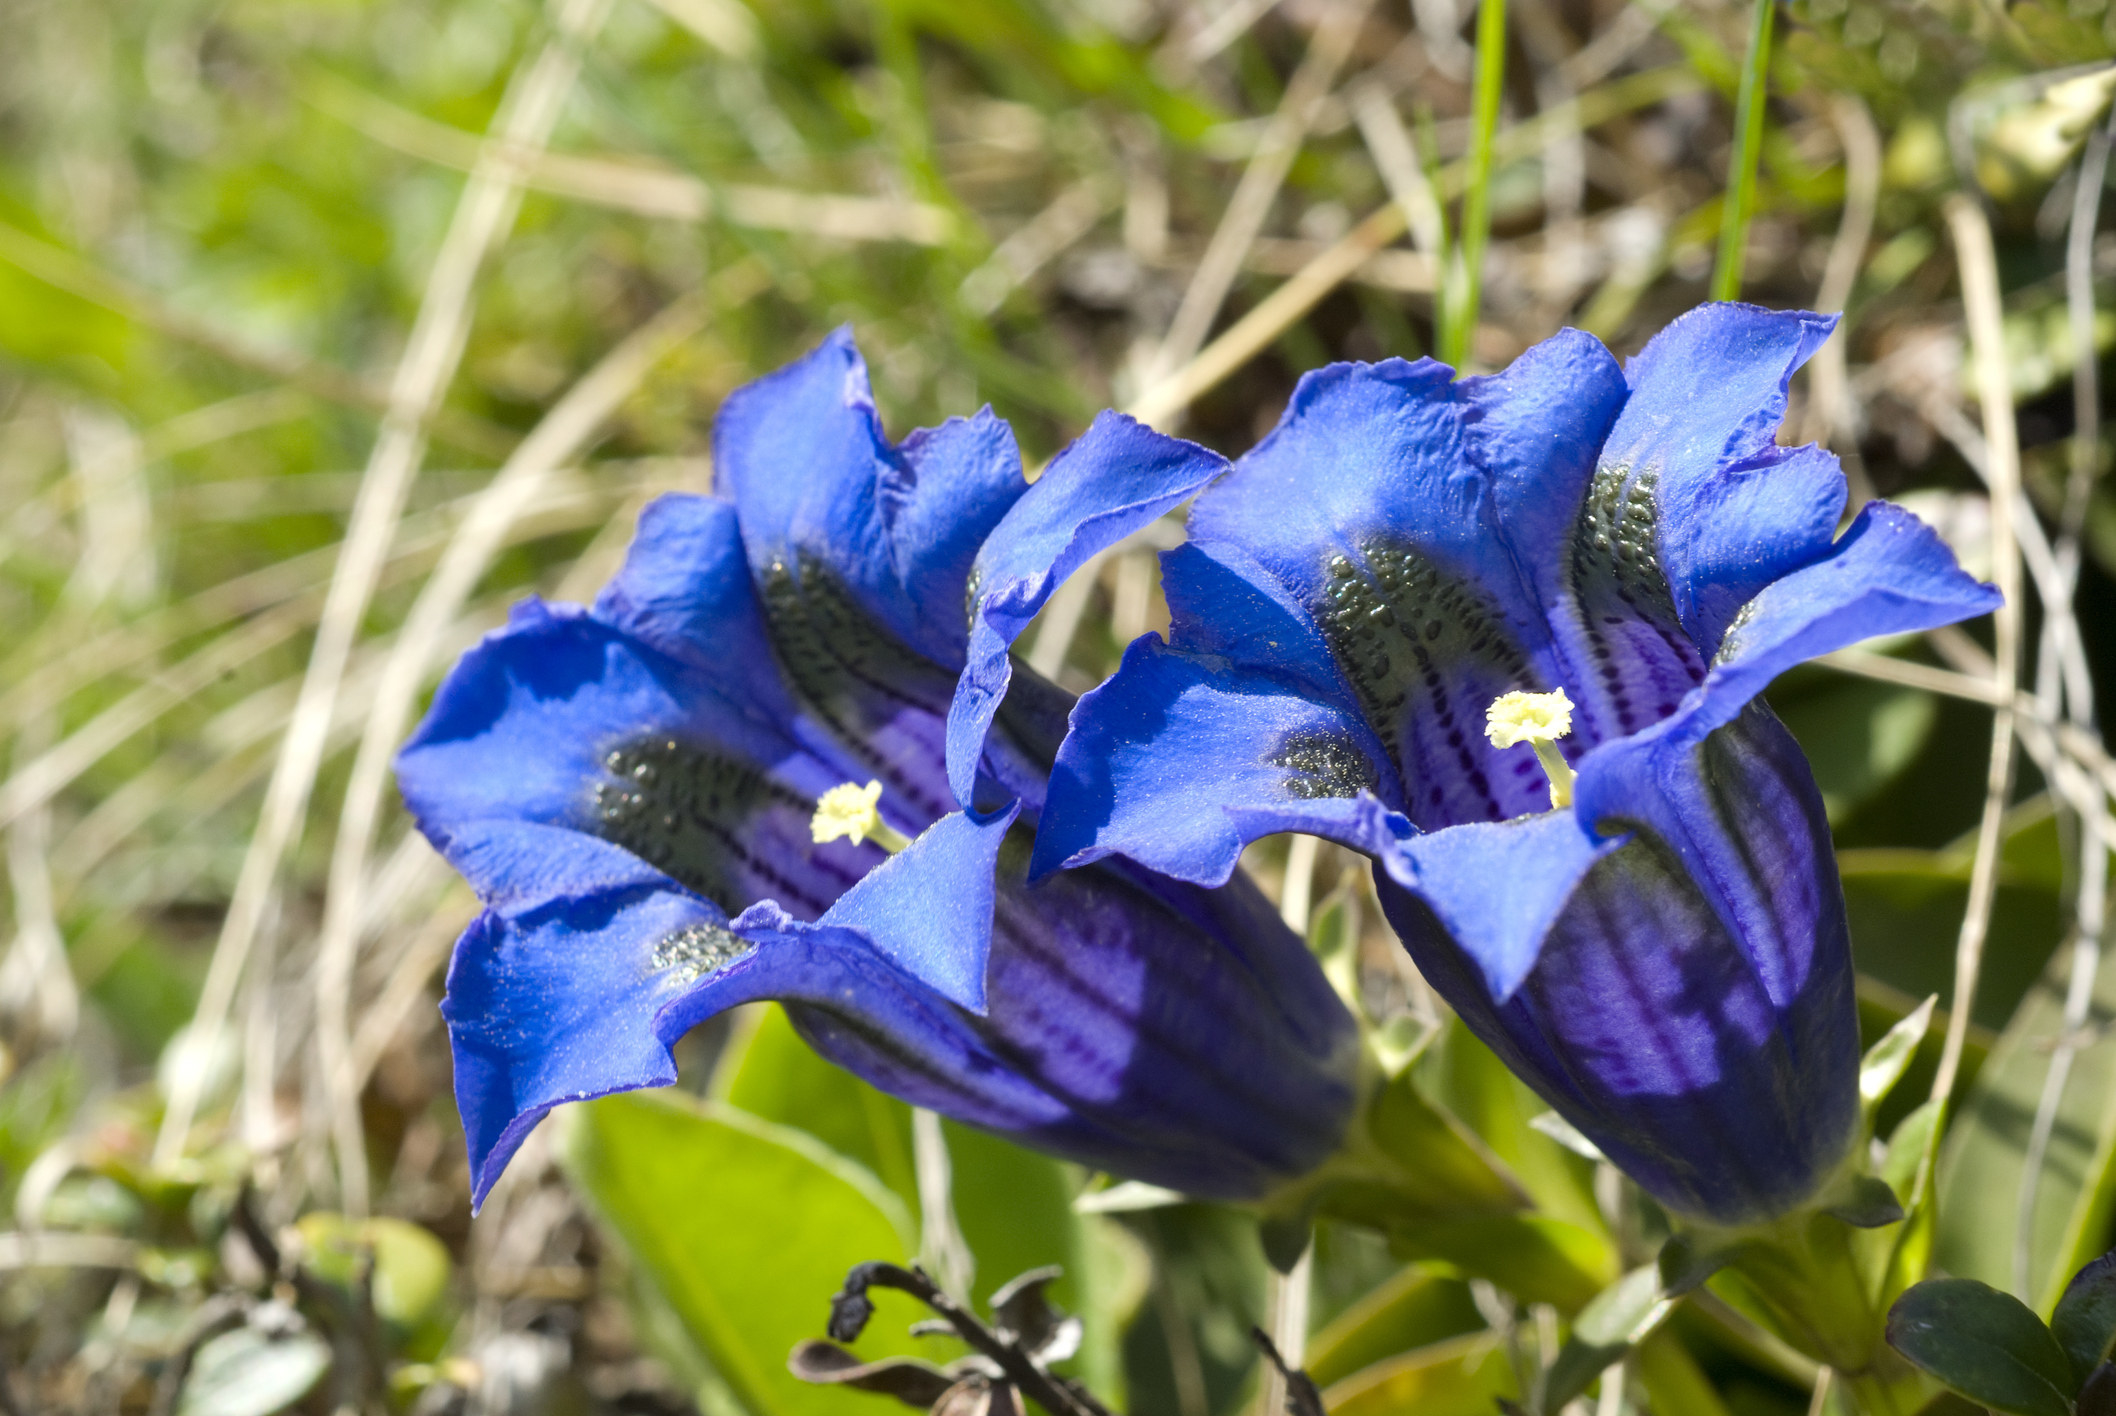 Two bright blue gentian flowers